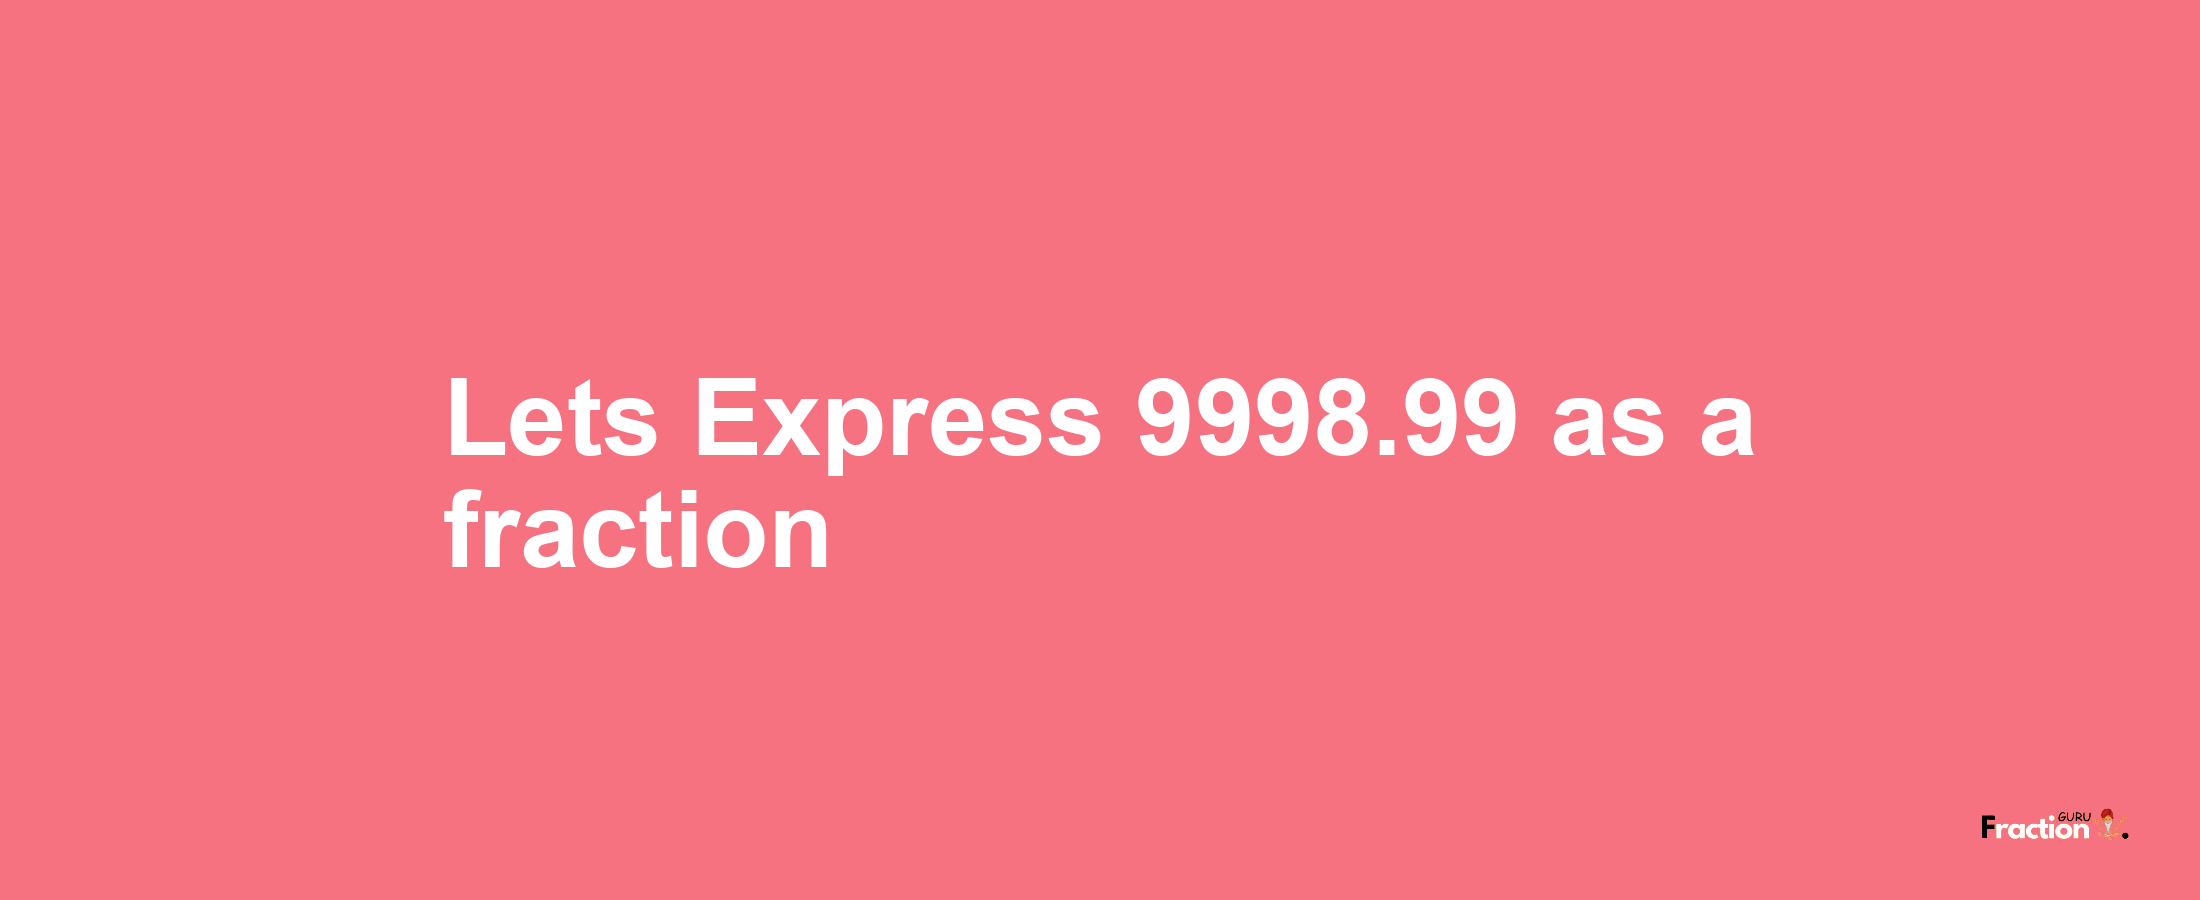 Lets Express 9998.99 as afraction